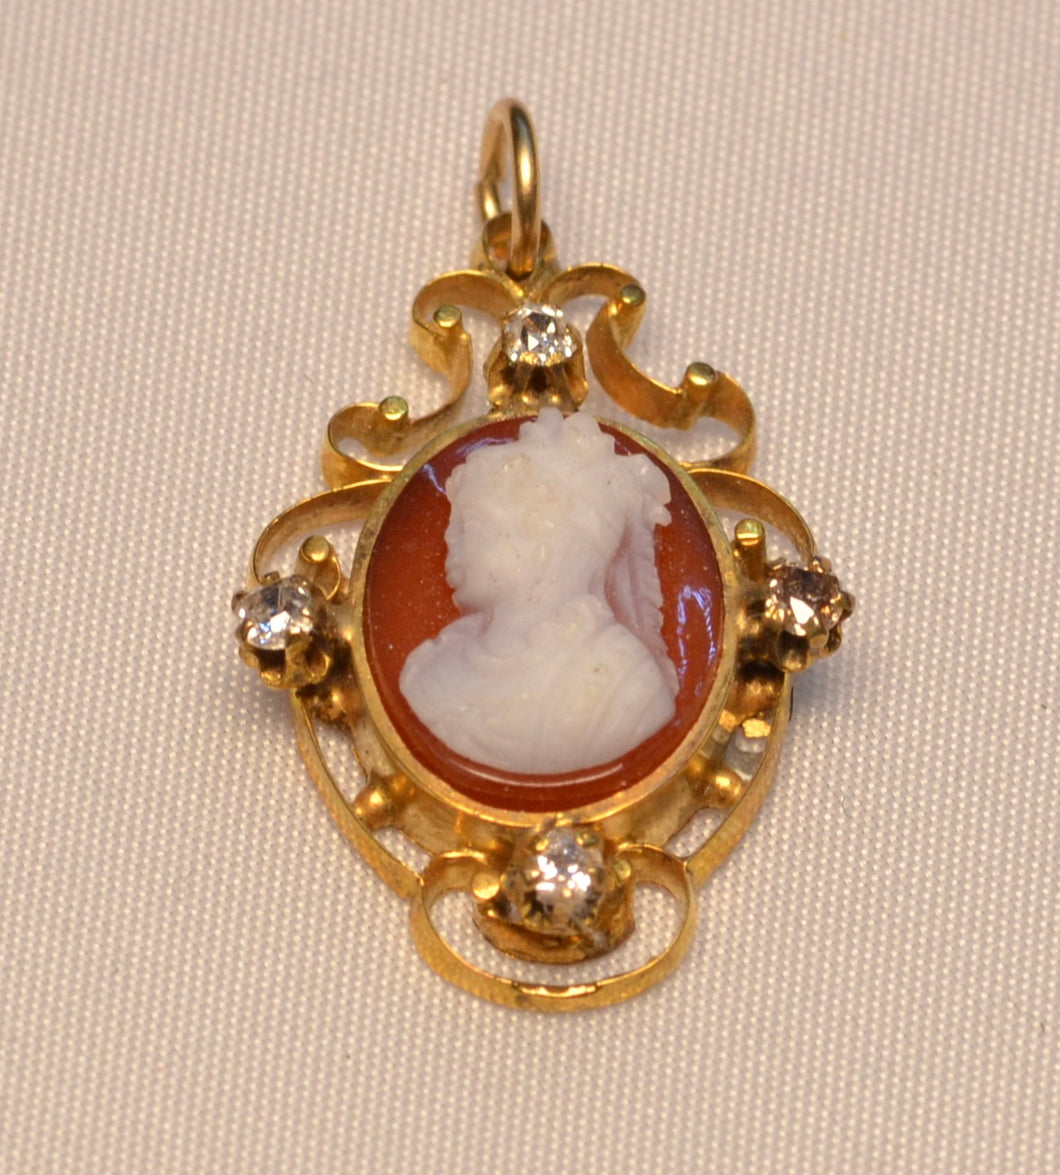 14K yellow gold hard stone cameo pendant with four old cut diamonds